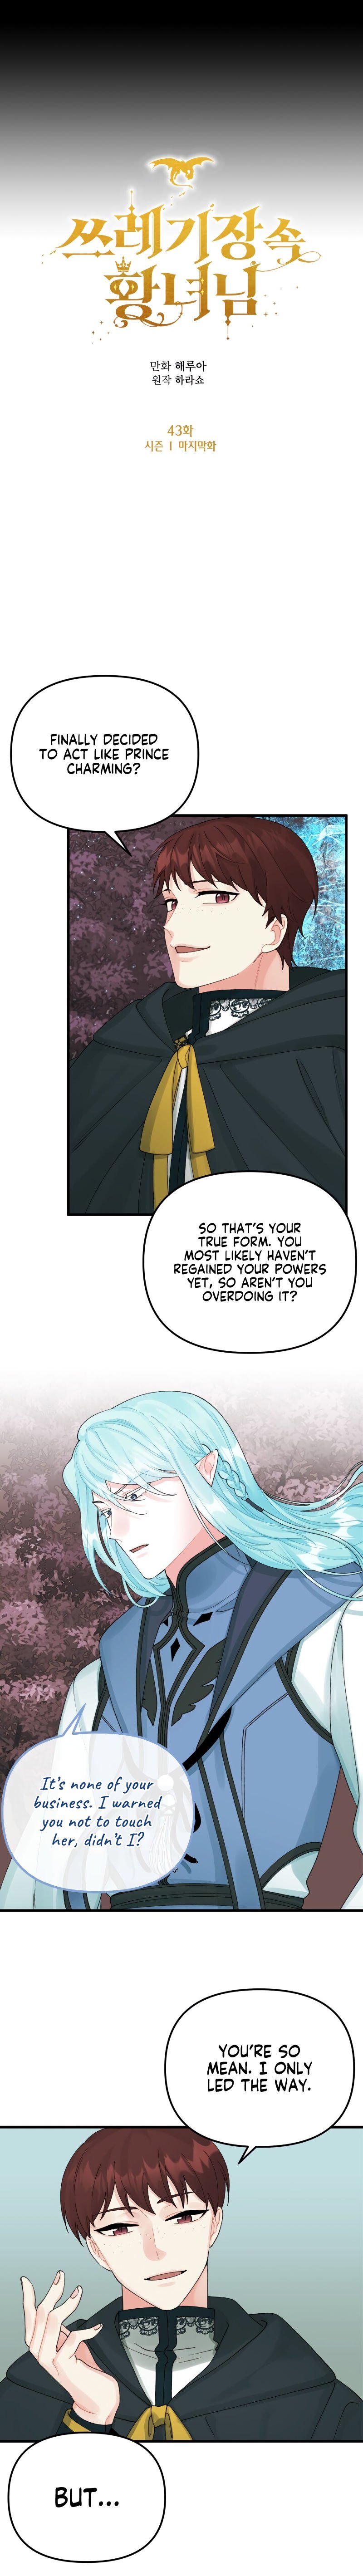 the-princess-in-the-dumpster-chap-43-2